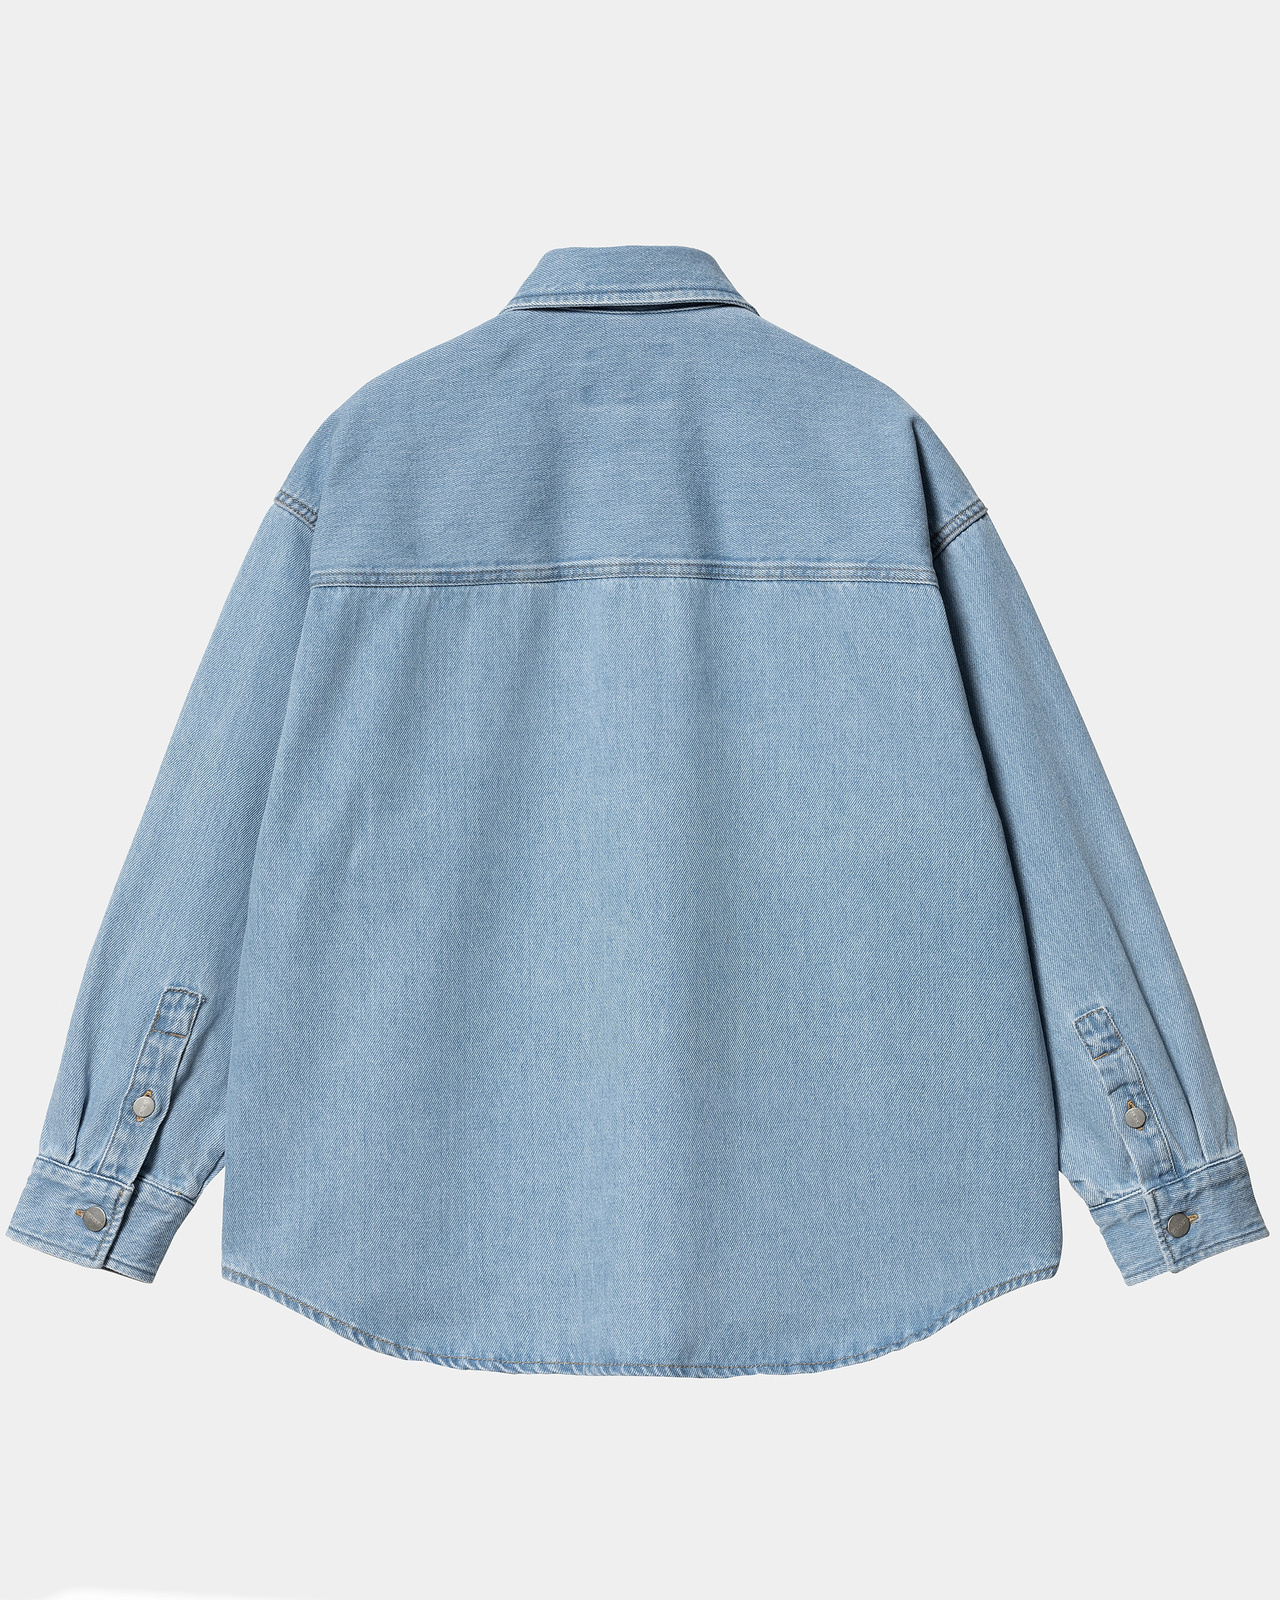 Overshirt Alta W´s - Blue Stone Bleached - S